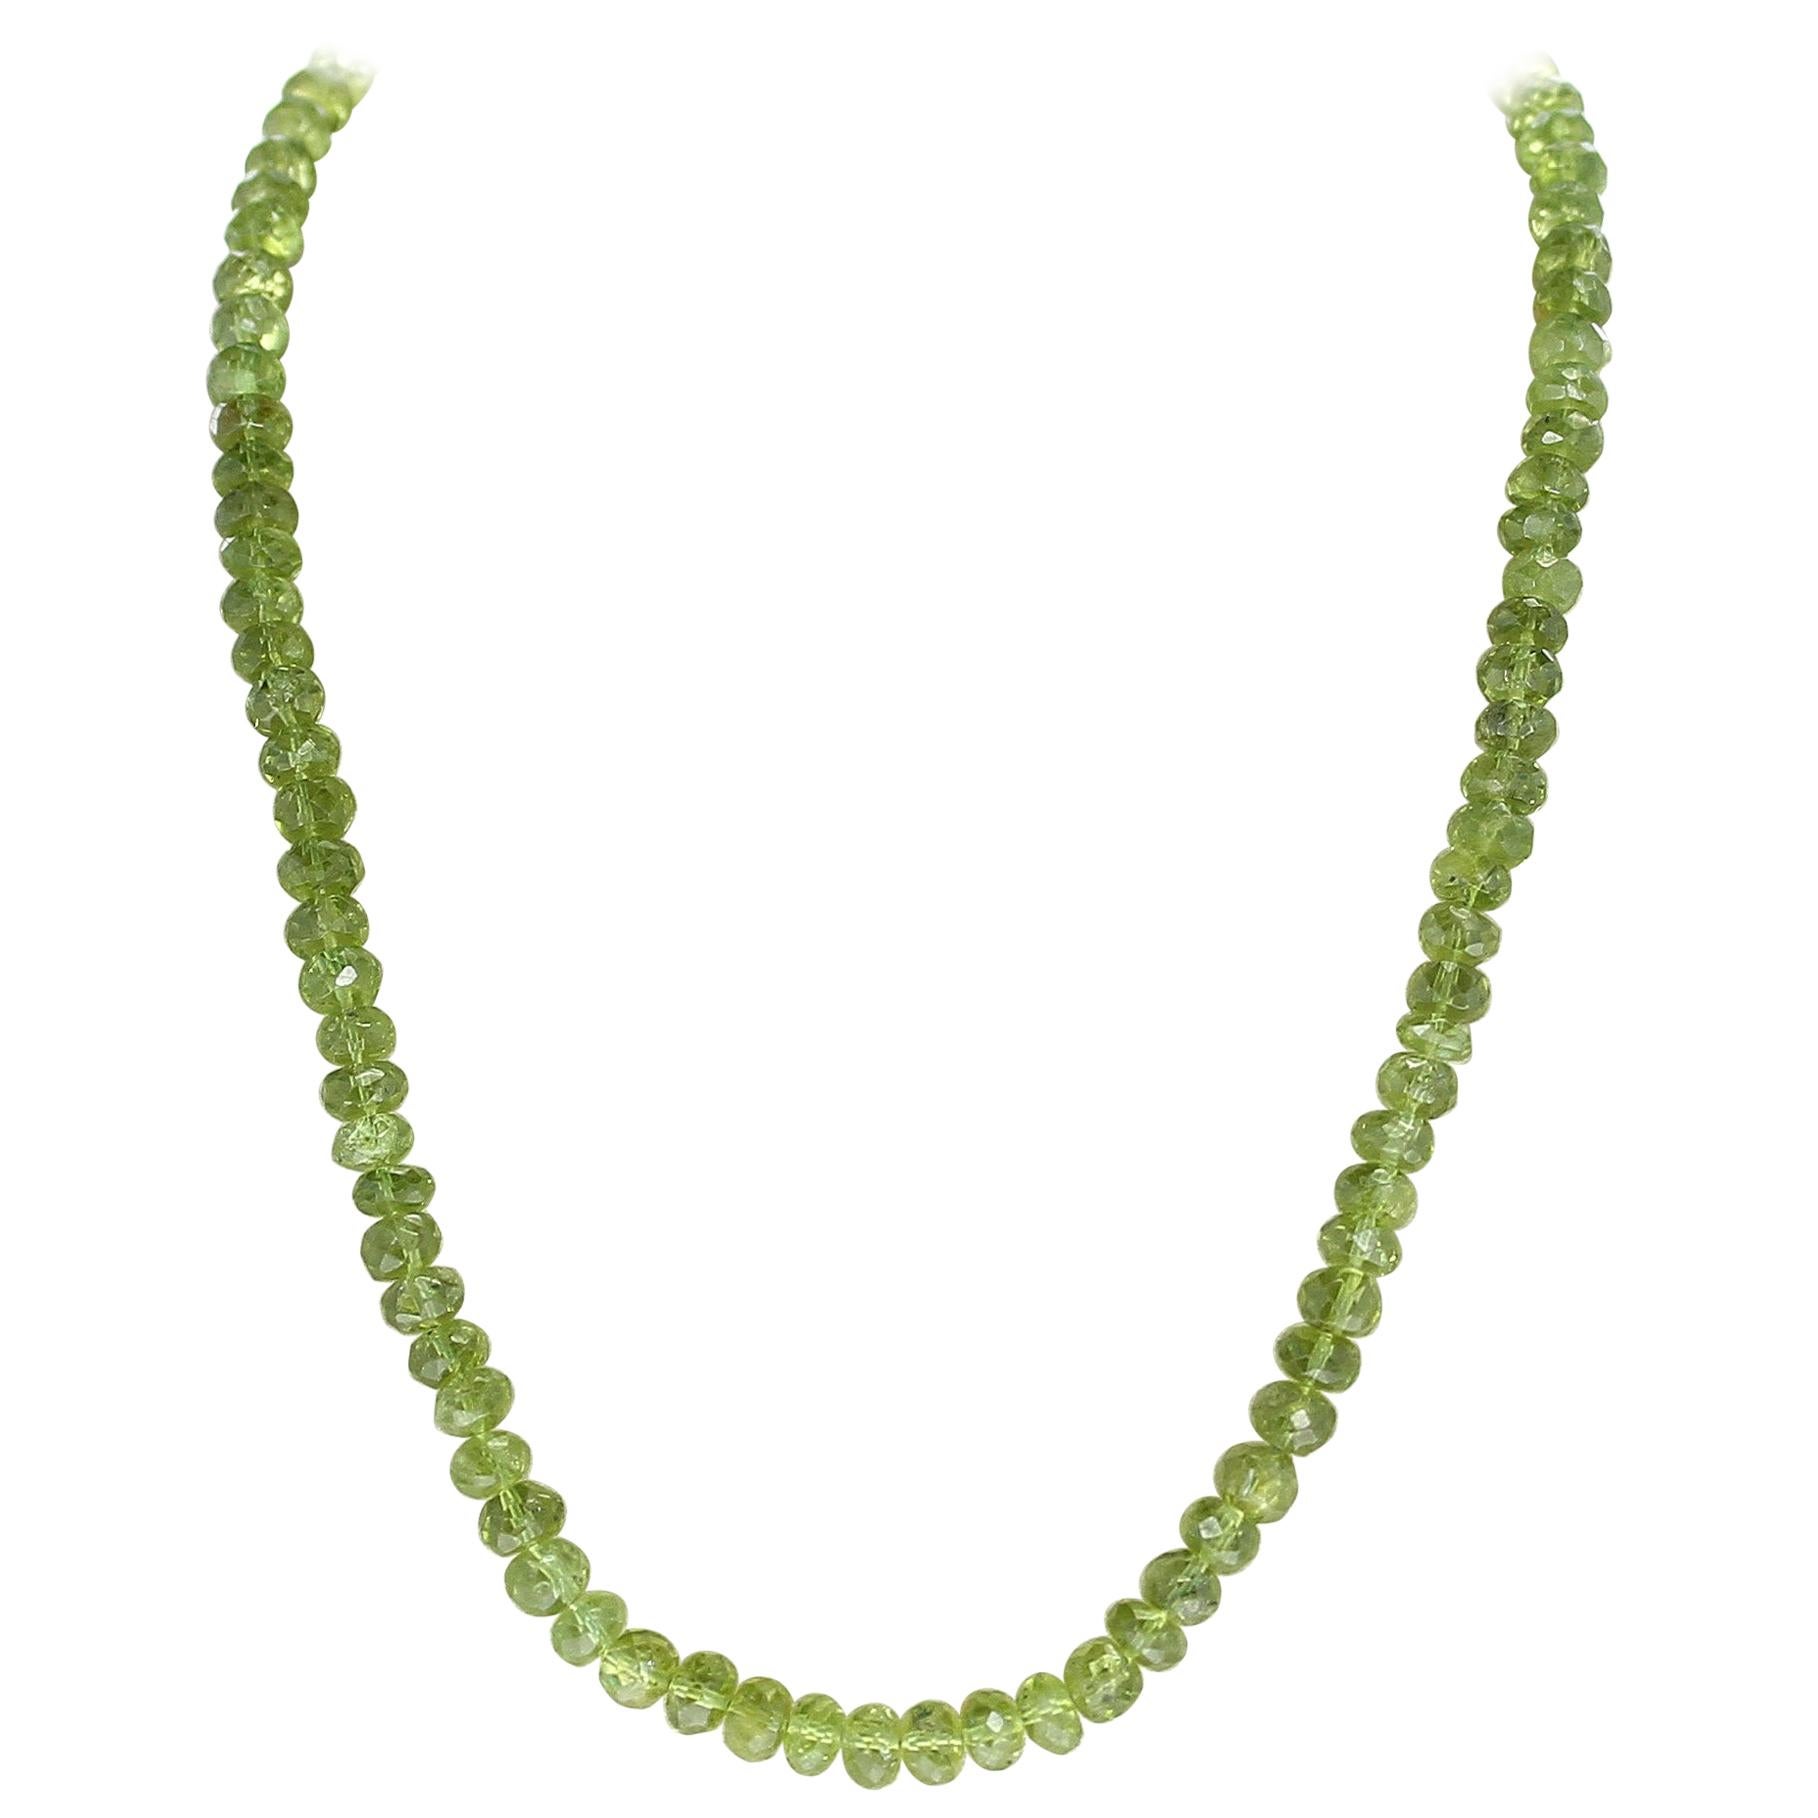 Genuine Faceted Peridot Beads Necklace, Sterling Silver Clasp